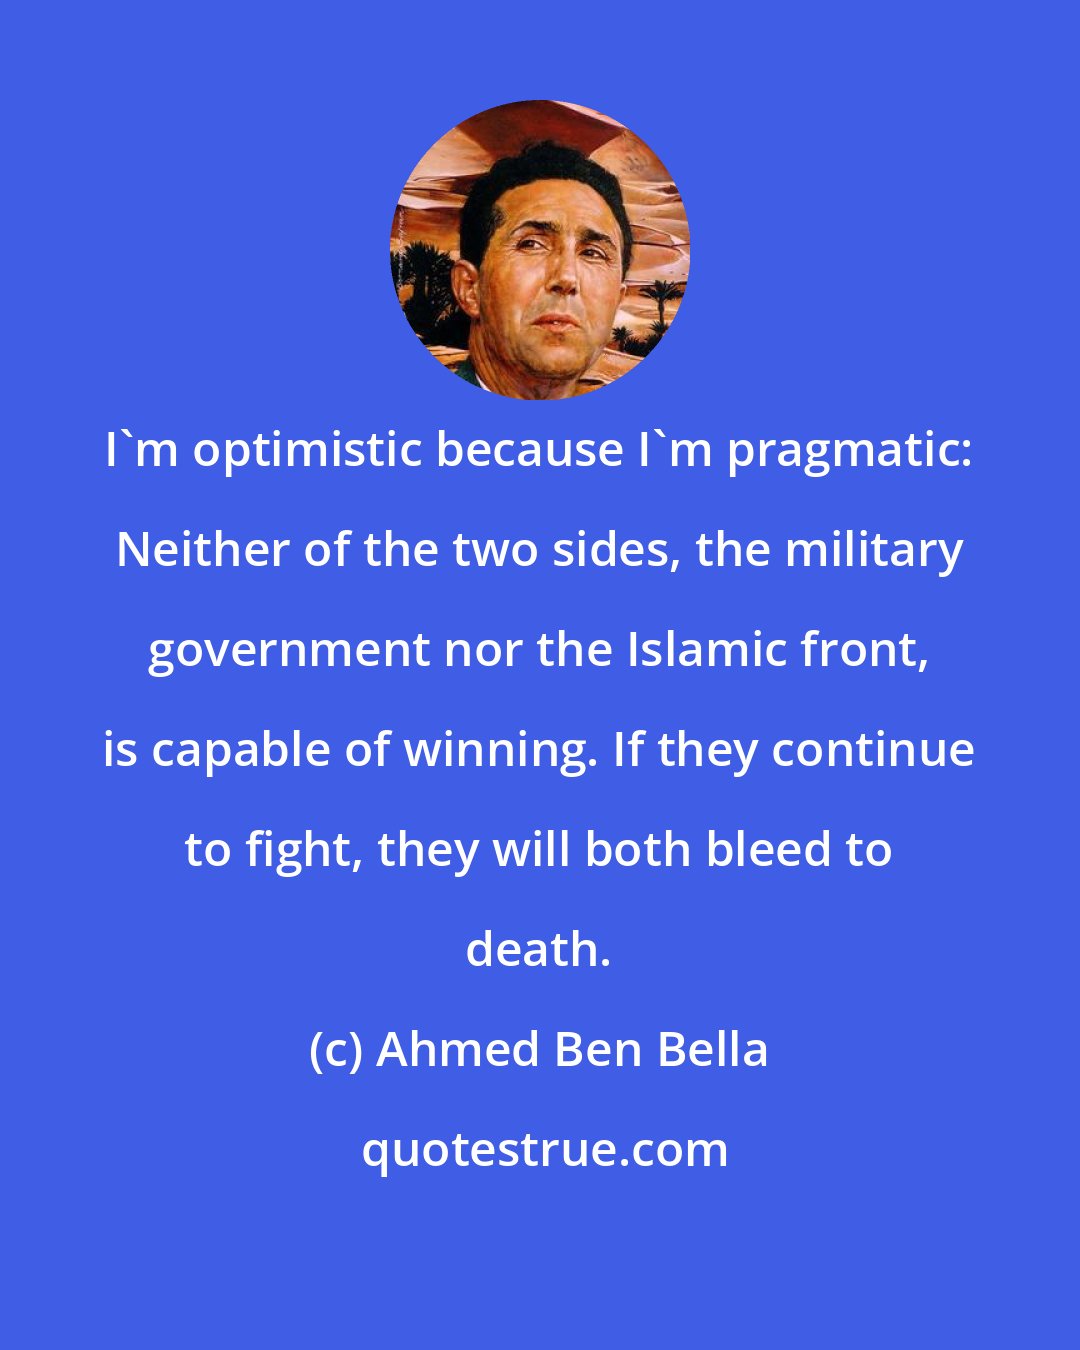 Ahmed Ben Bella: I'm optimistic because I'm pragmatic: Neither of the two sides, the military government nor the Islamic front, is capable of winning. If they continue to fight, they will both bleed to death.